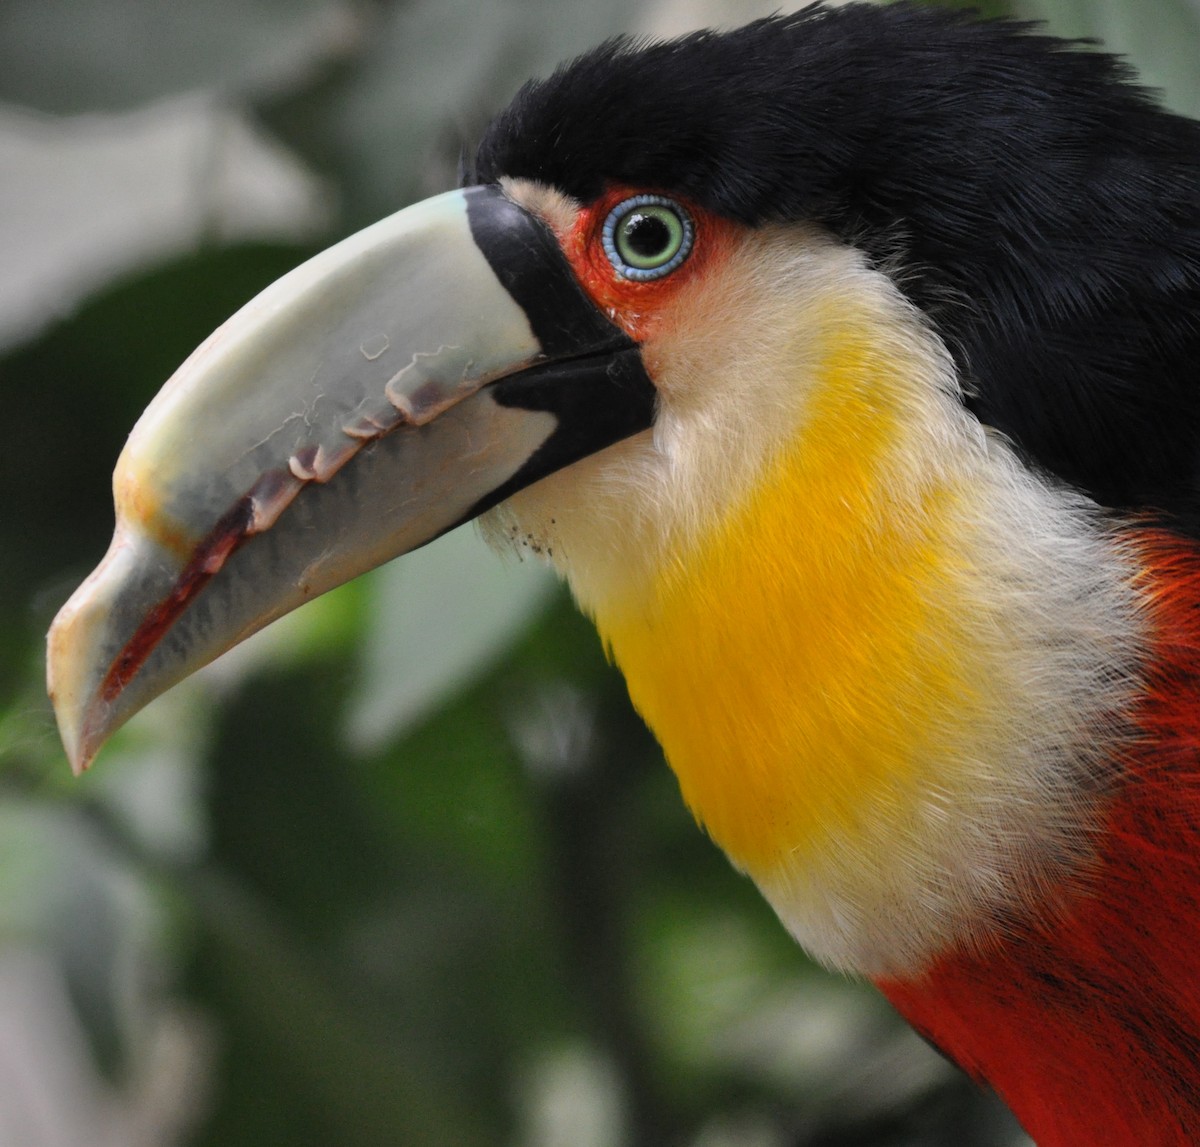 Red-breasted Toucan - Diana Flora Padron Novoa